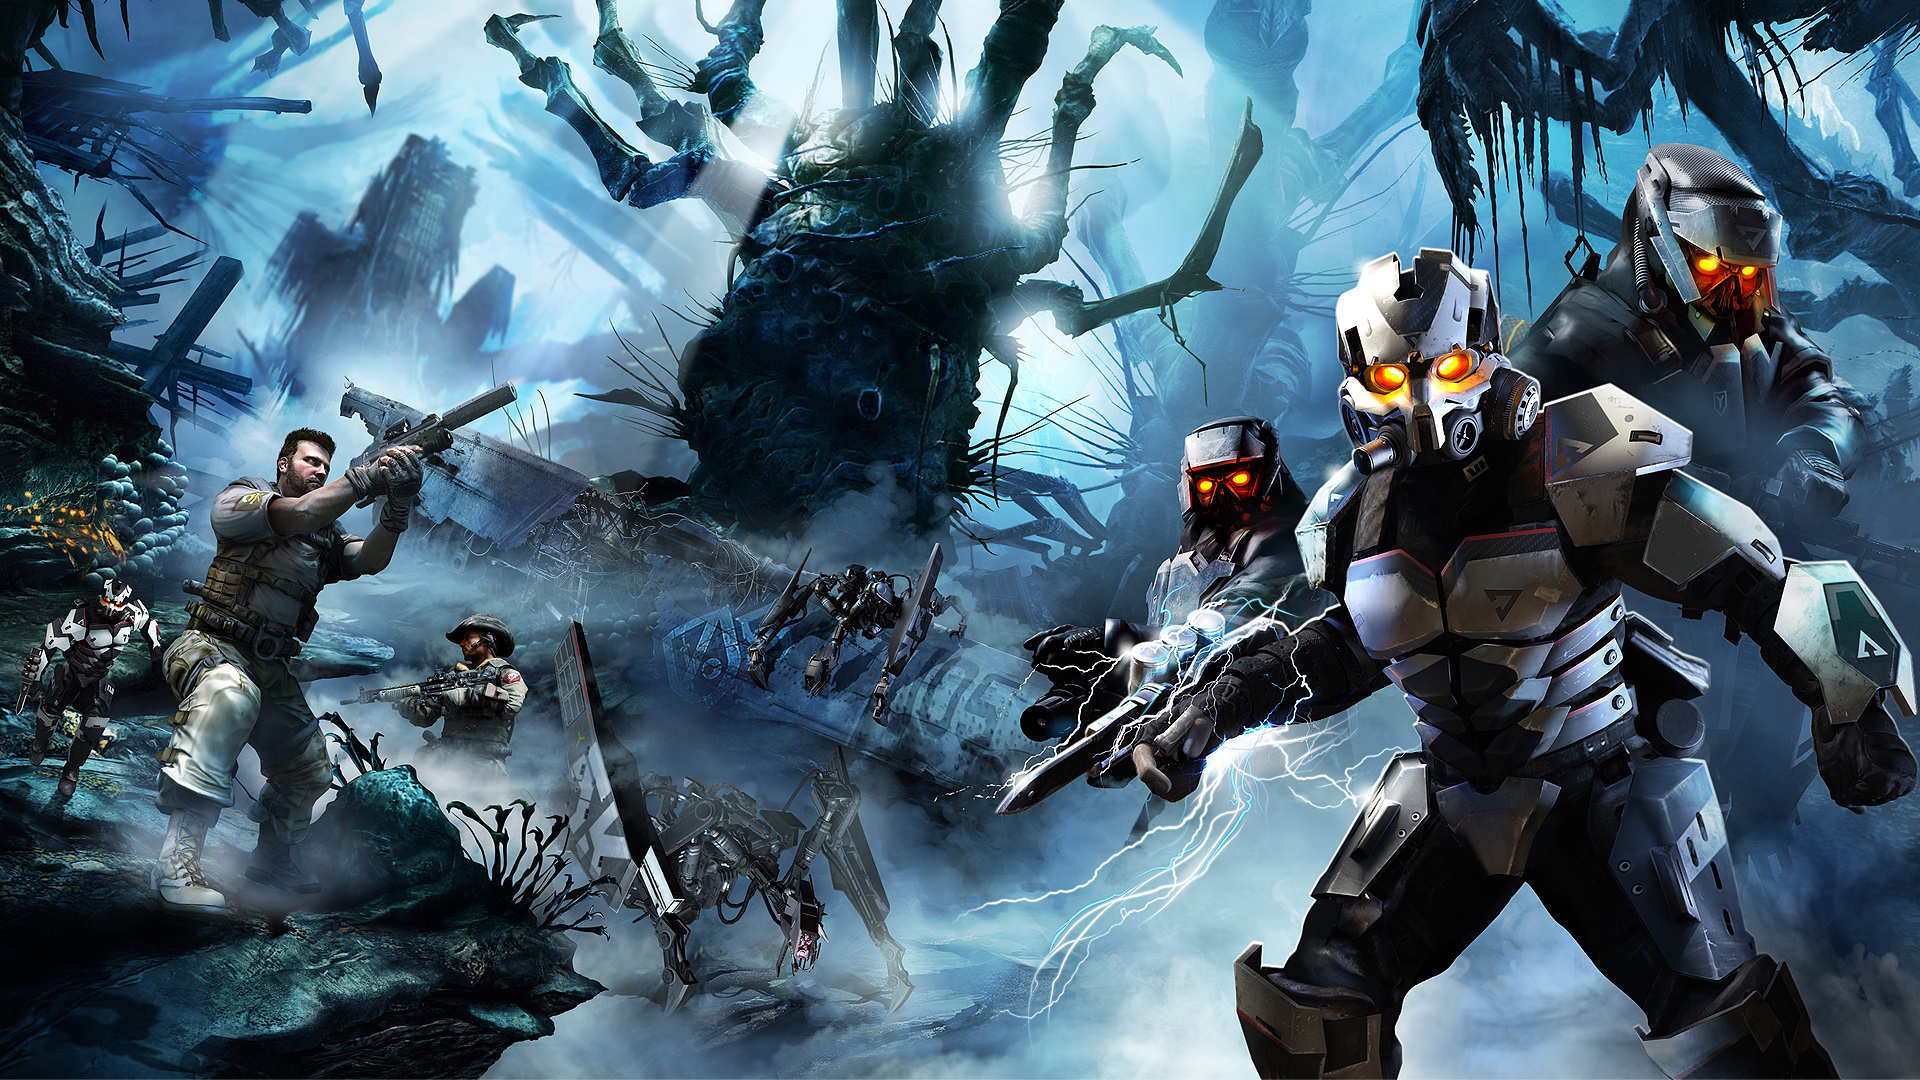 Killzone wallpapers, High-quality backgrounds, 1920x1080 Full HD Desktop